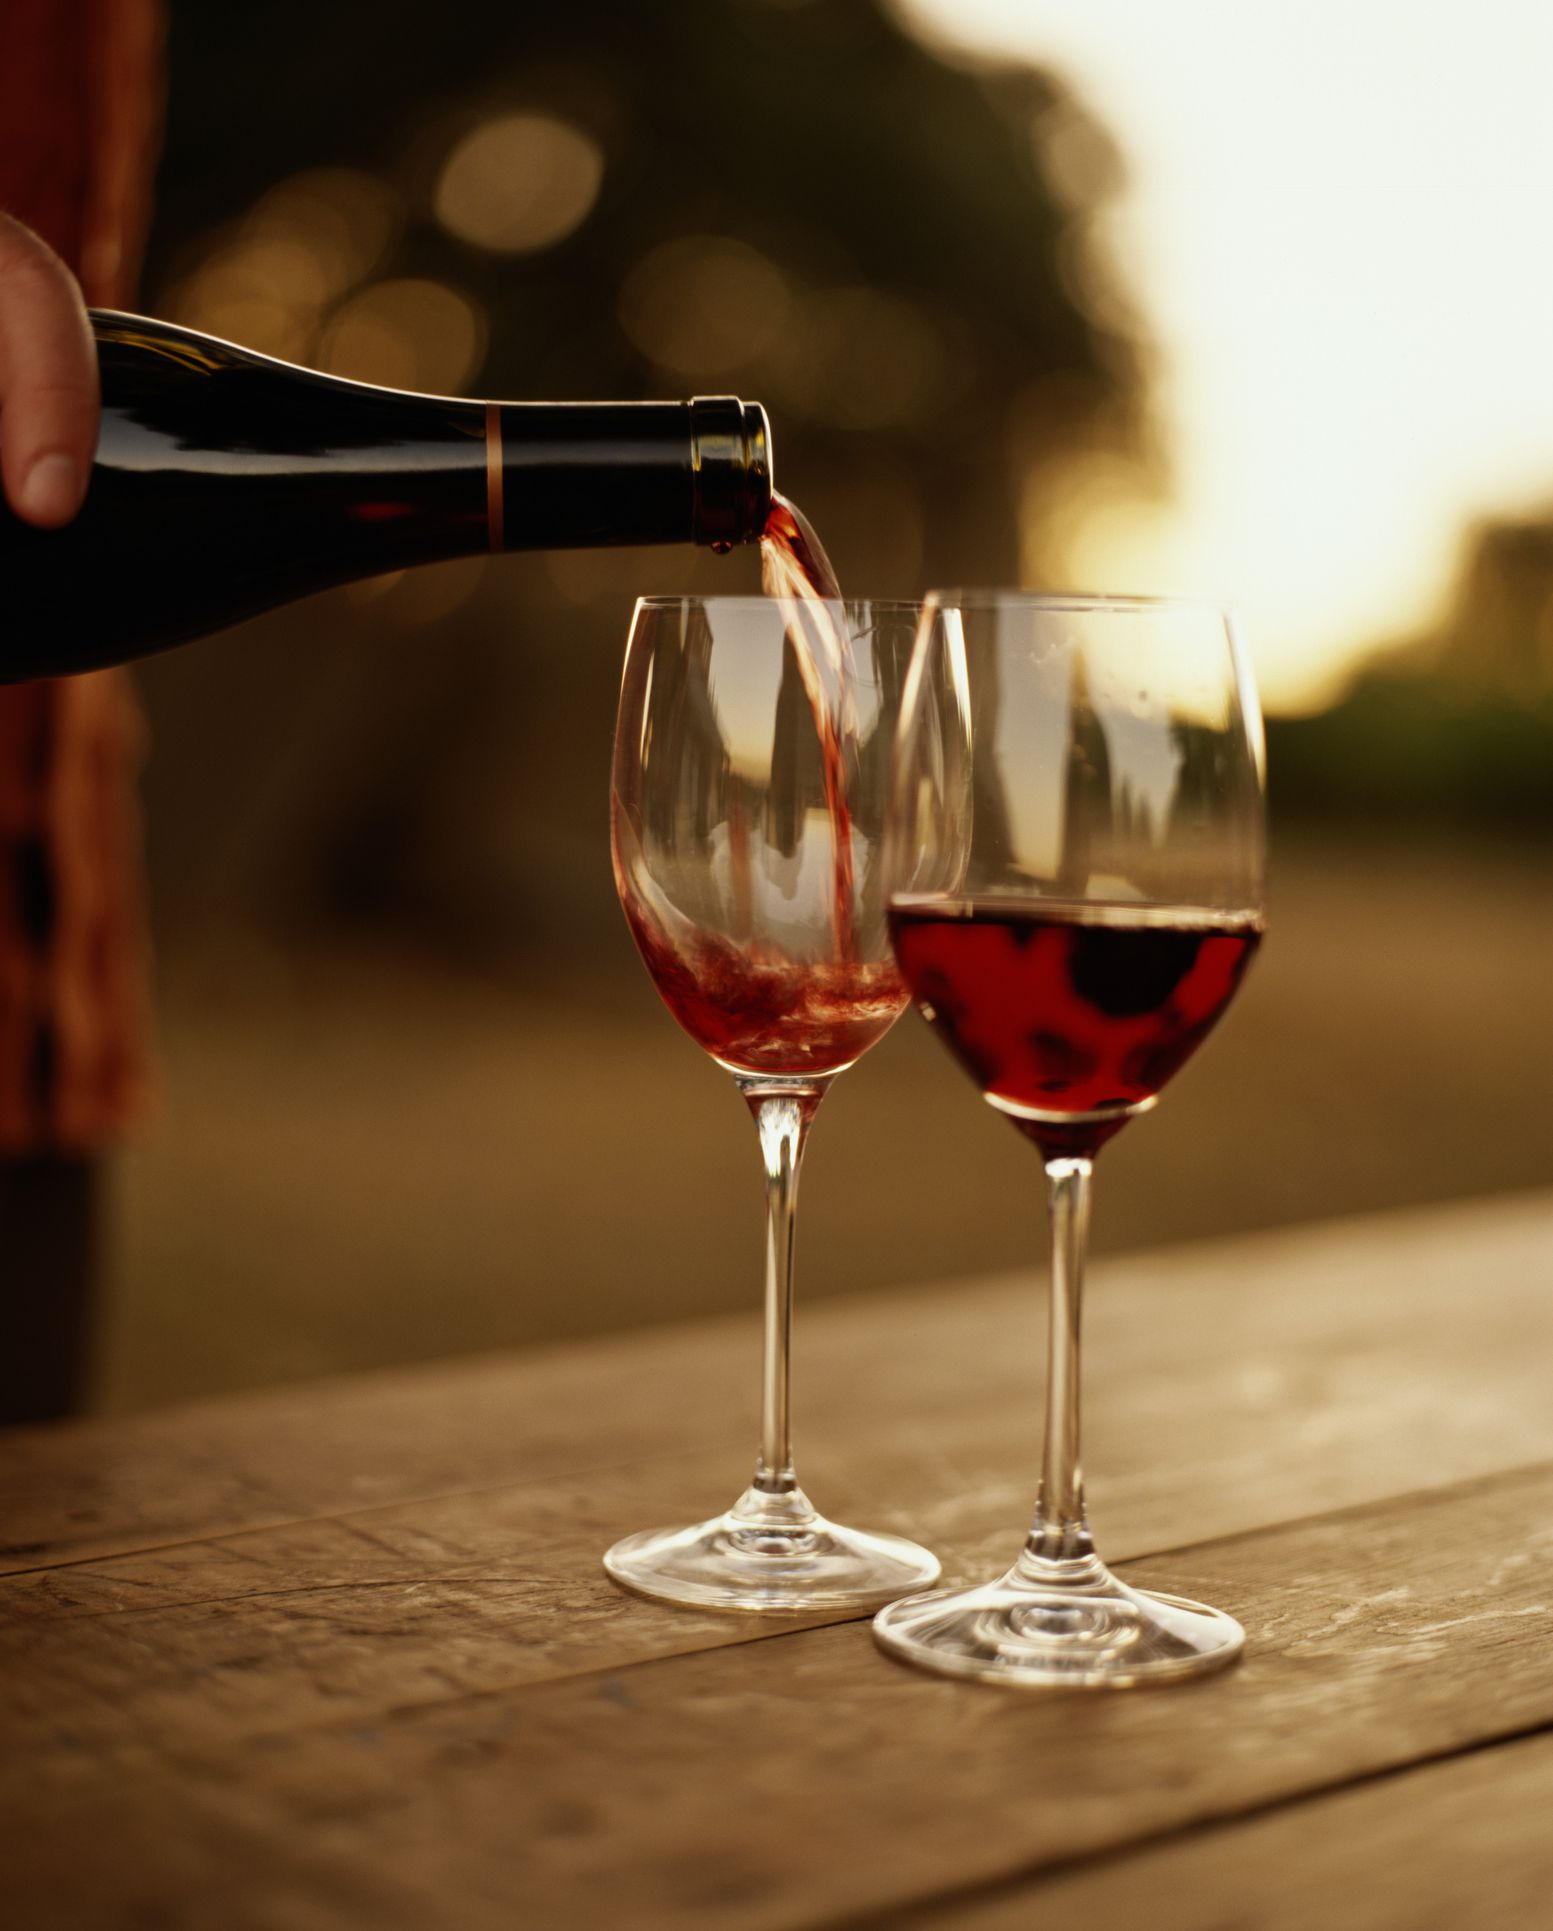 The 8 Best Red Wines to Drink in 2020